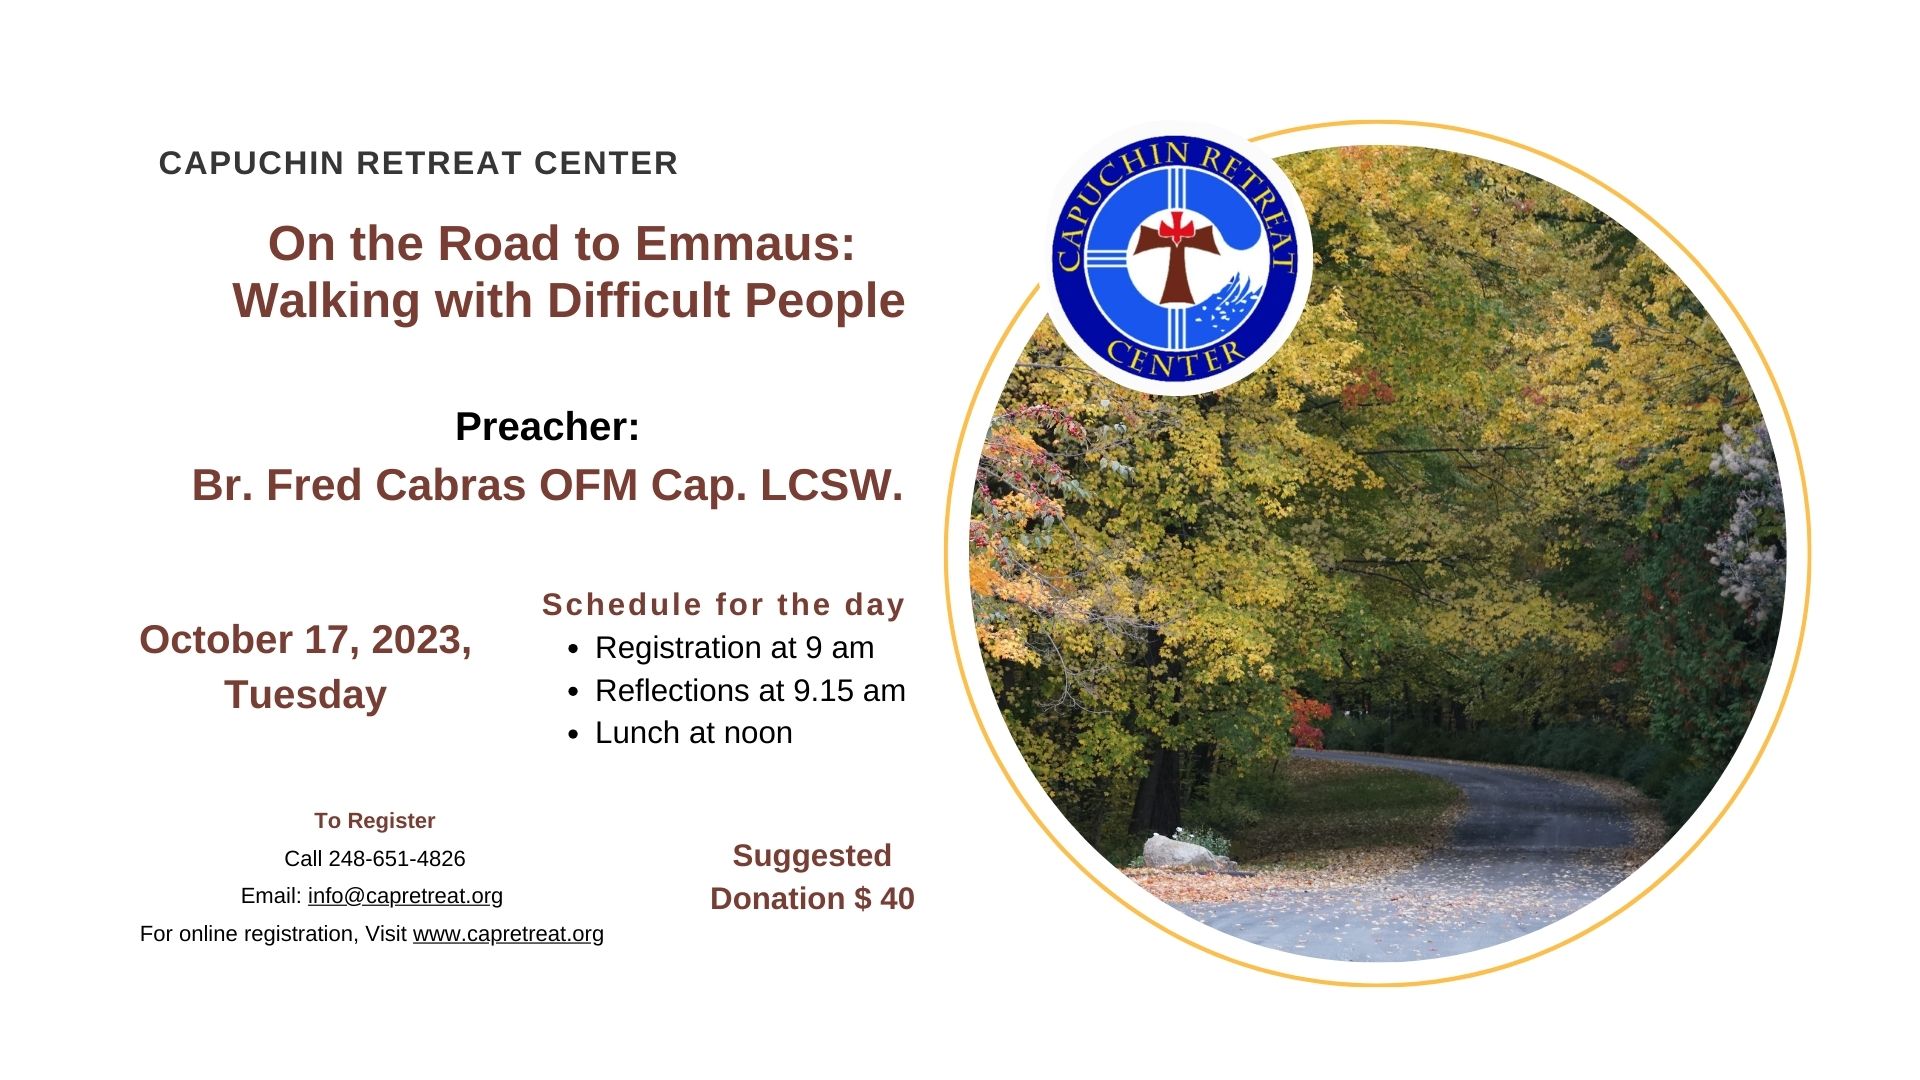 Morning of Reflection: “On the Road to Emmaus: Walking with Difficult People”